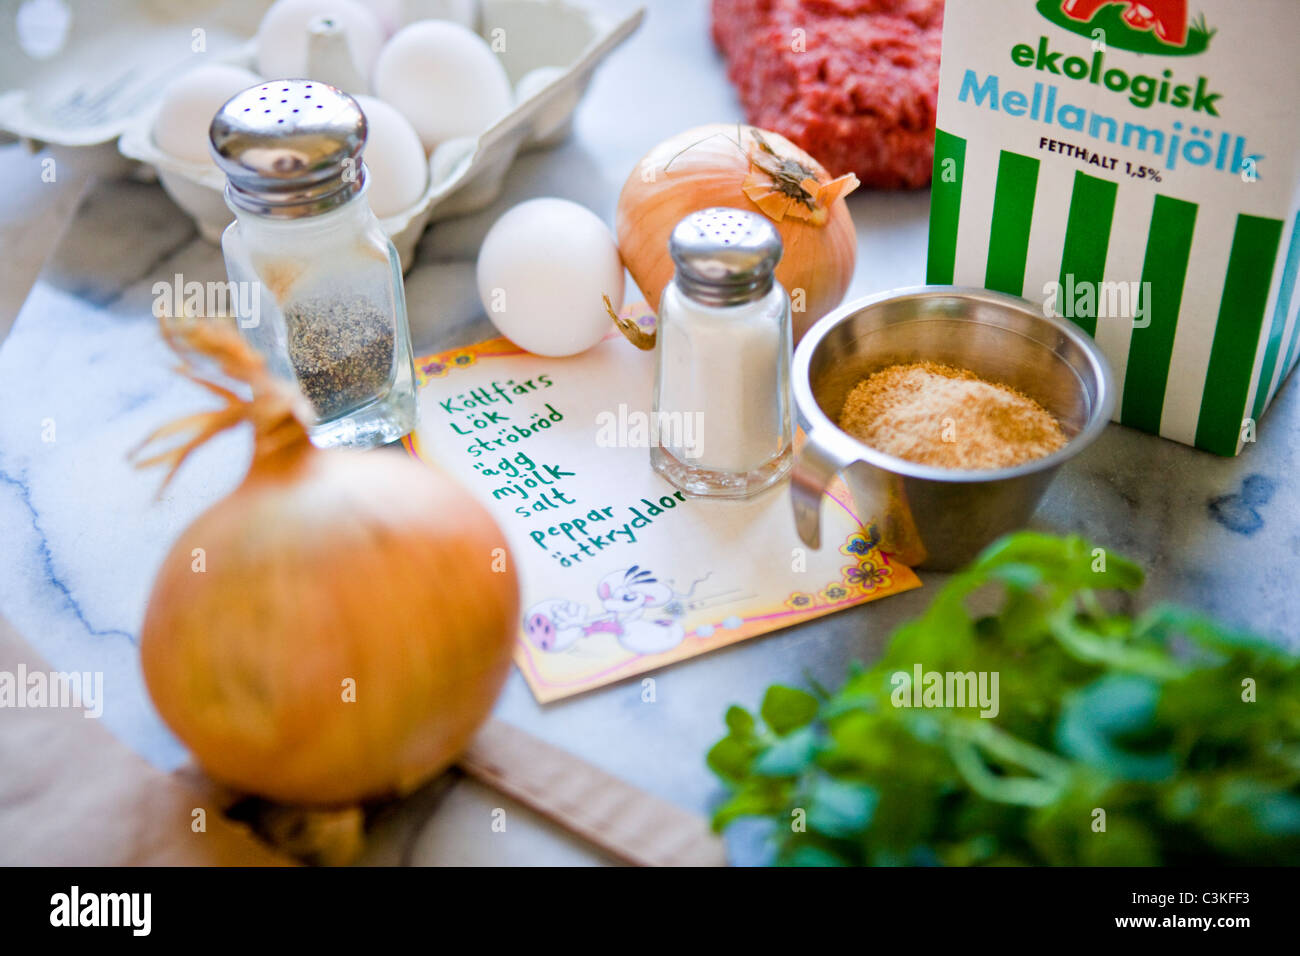 Omlet ingredients on table Stock Photo